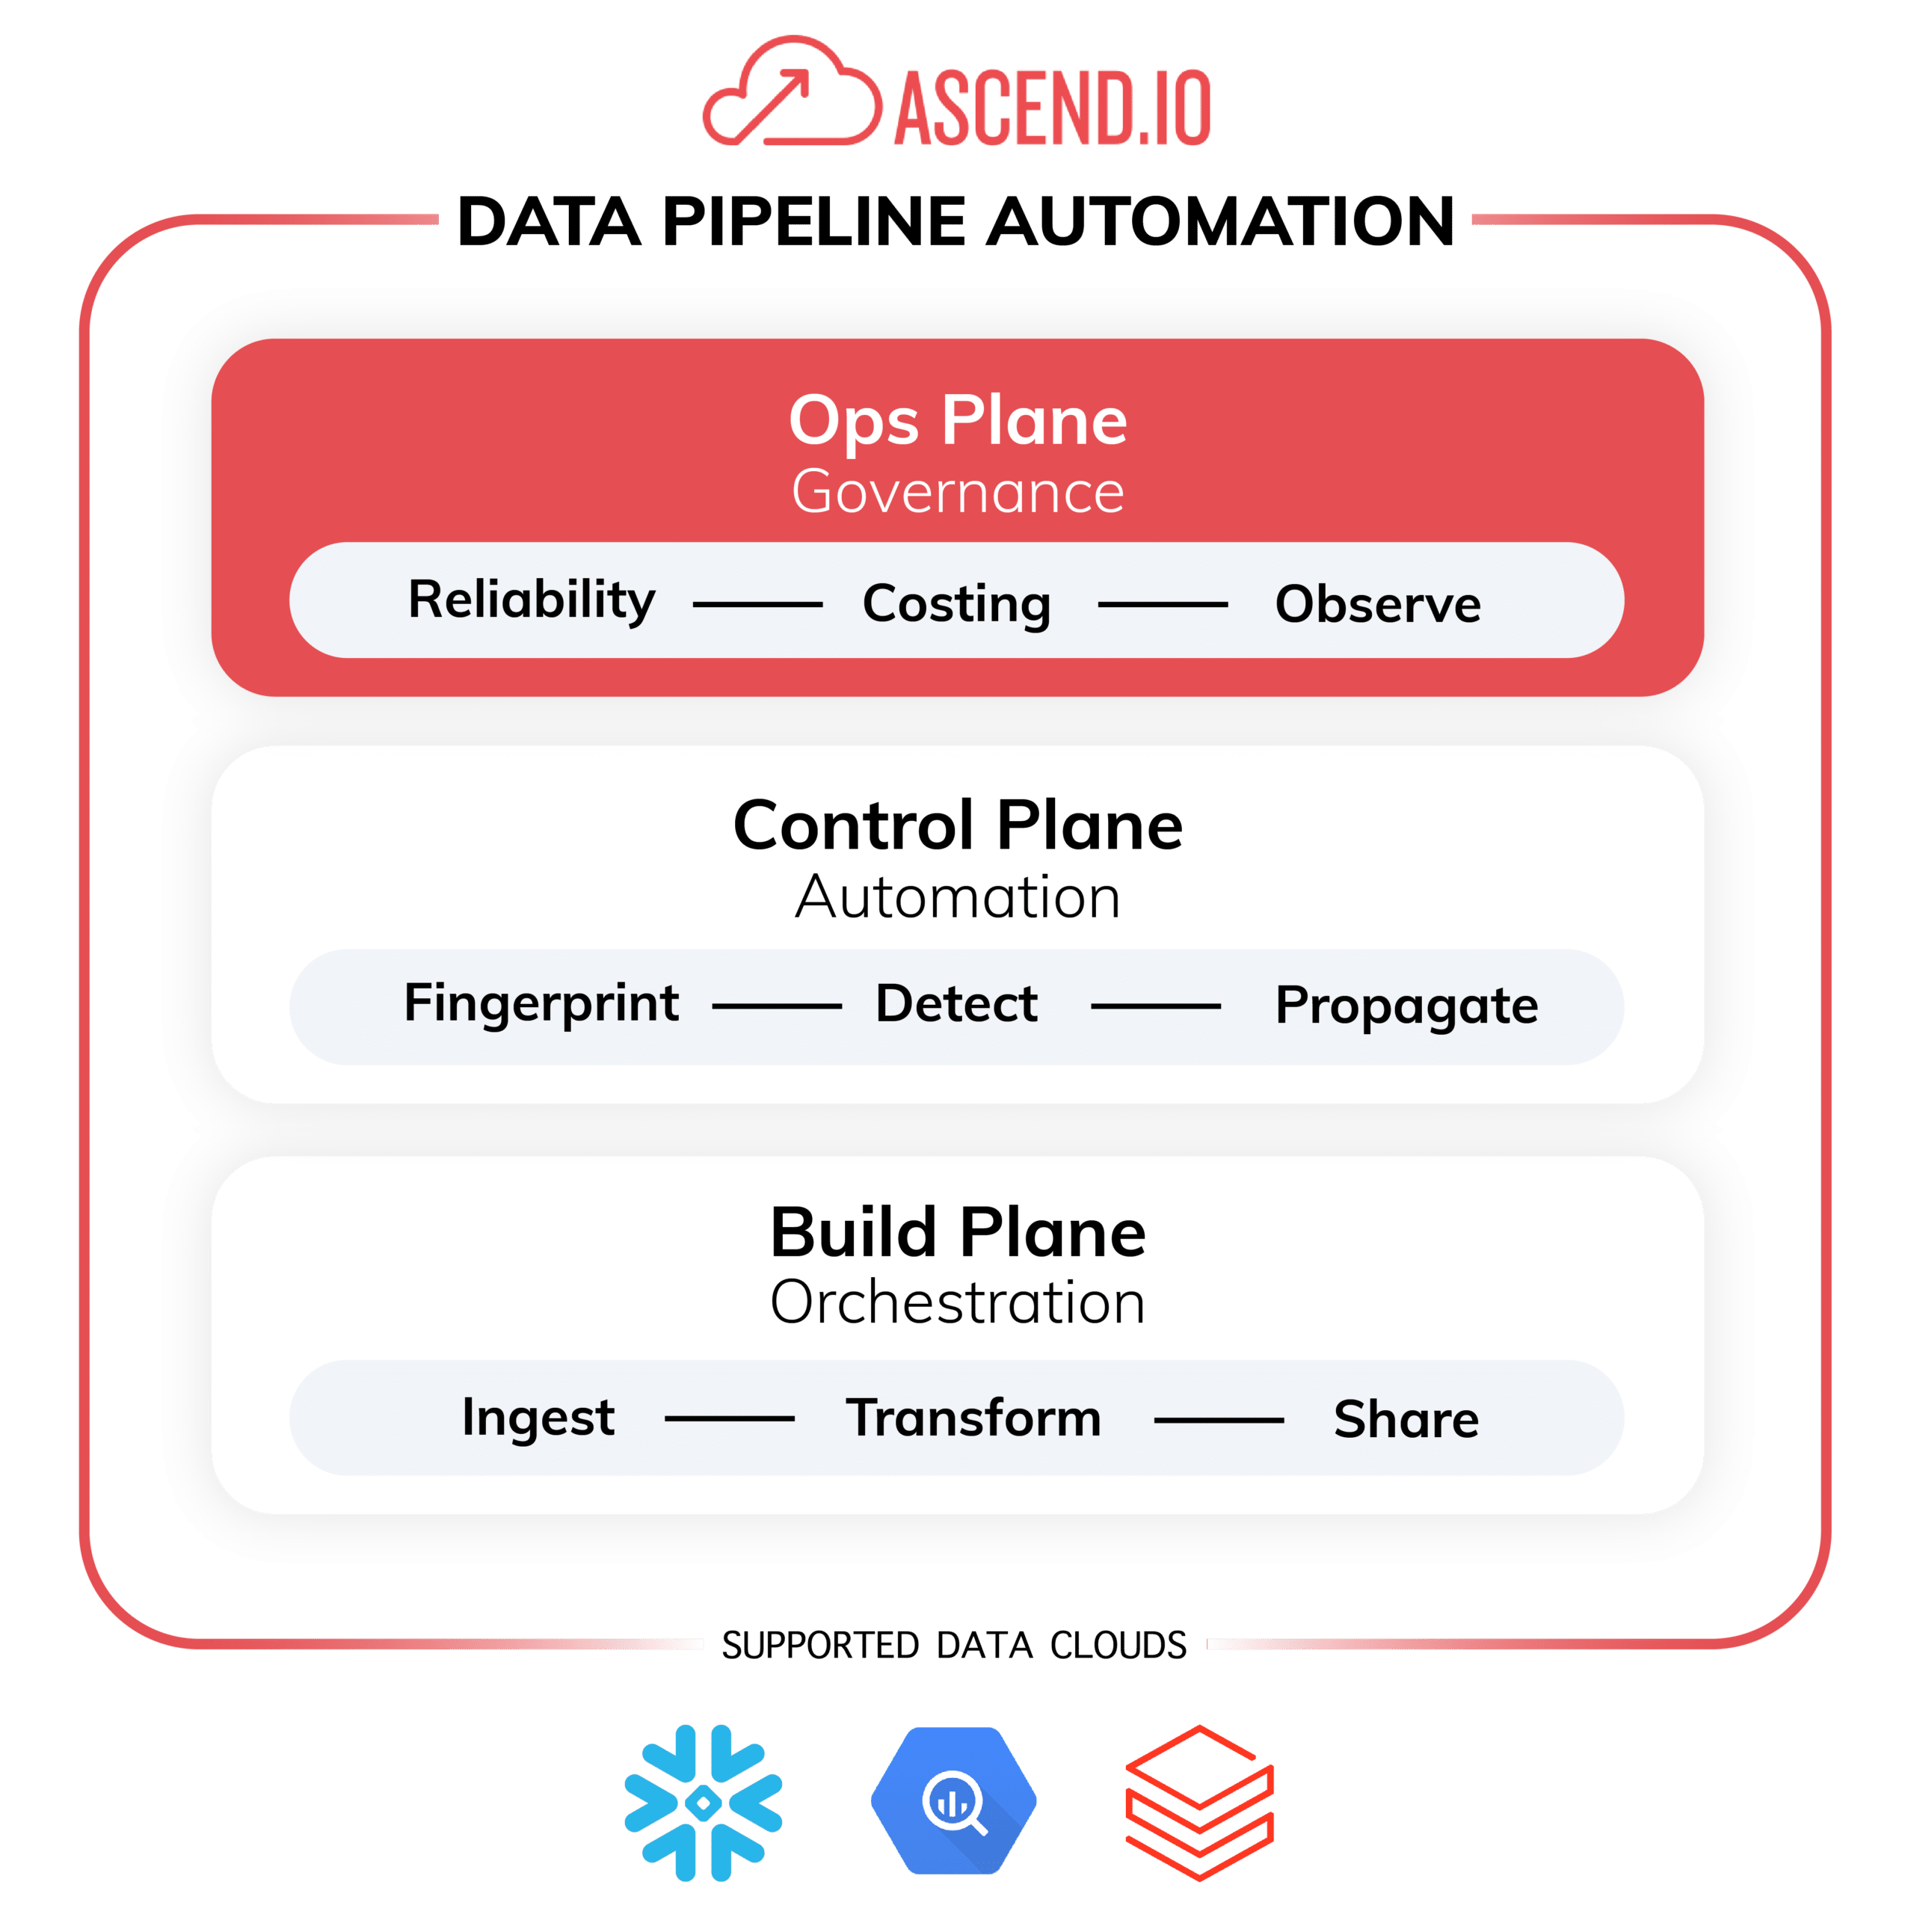 Data pipeline automation platform diagram with ops plane highlighted in red to show unified DataOps solution.